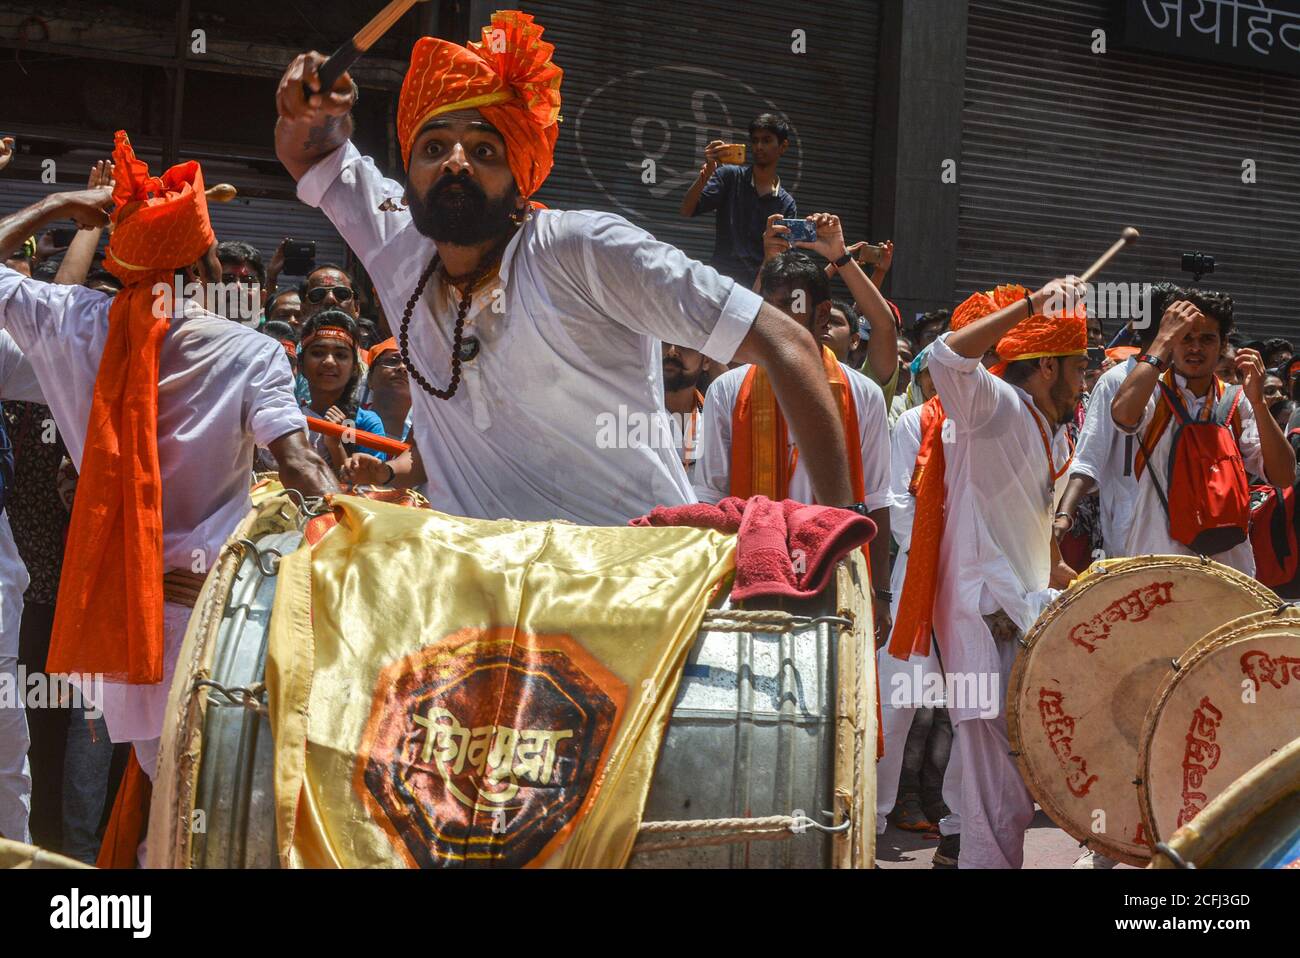 Pune, India - September 4, 2017: Member of Shivmudra Dhol Tasha Pathak looking aggressively while playing dhol. A Person playing dhol passionately on Stock Photo